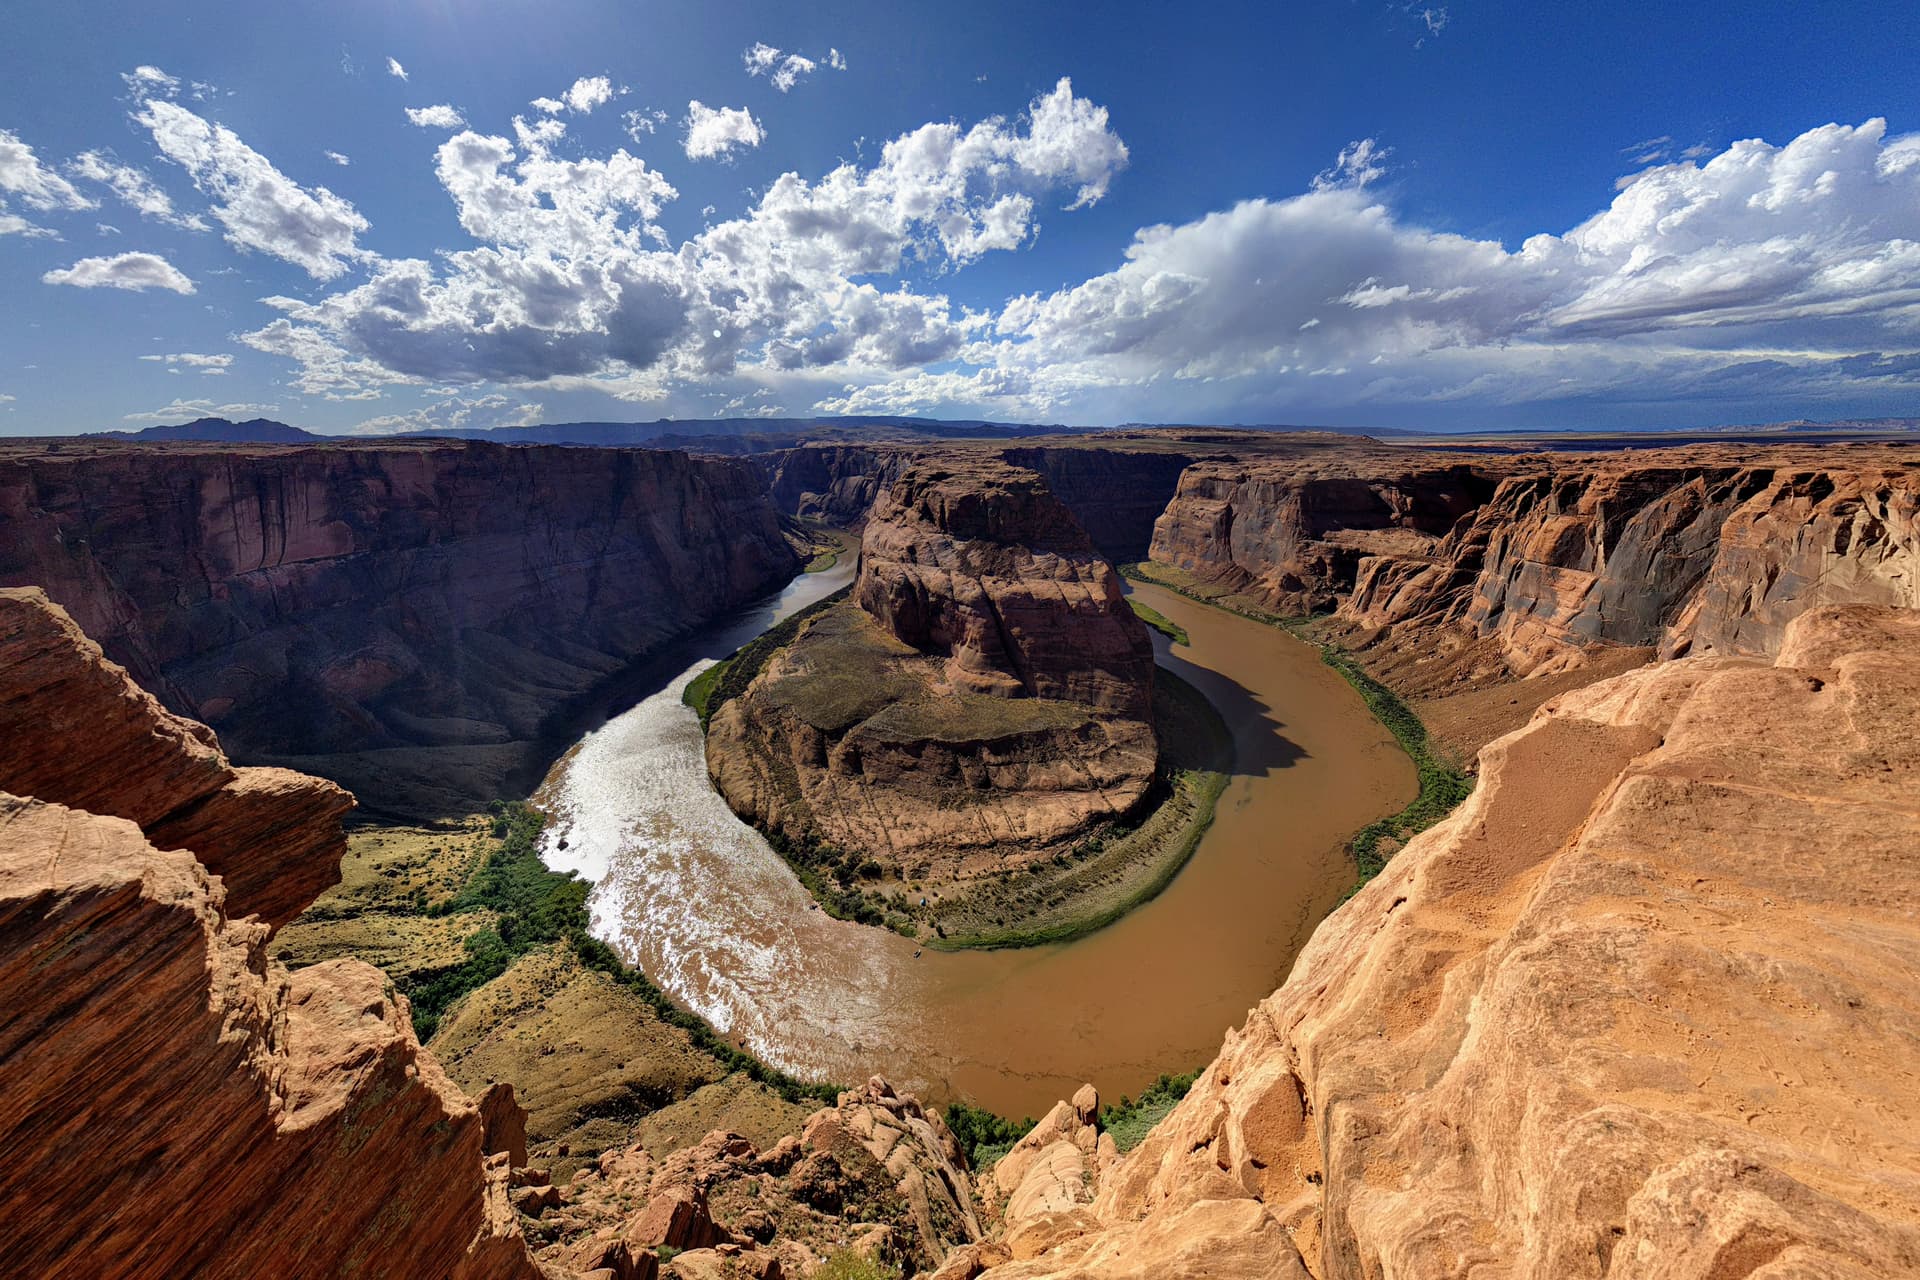 A wide-angle shot of the iconic Horseshoe Bend in the Colorado River (technically within the Grand Canyon National Park, as the park extends from the rim wall to the River all the way to the Glen Canyon Dam).